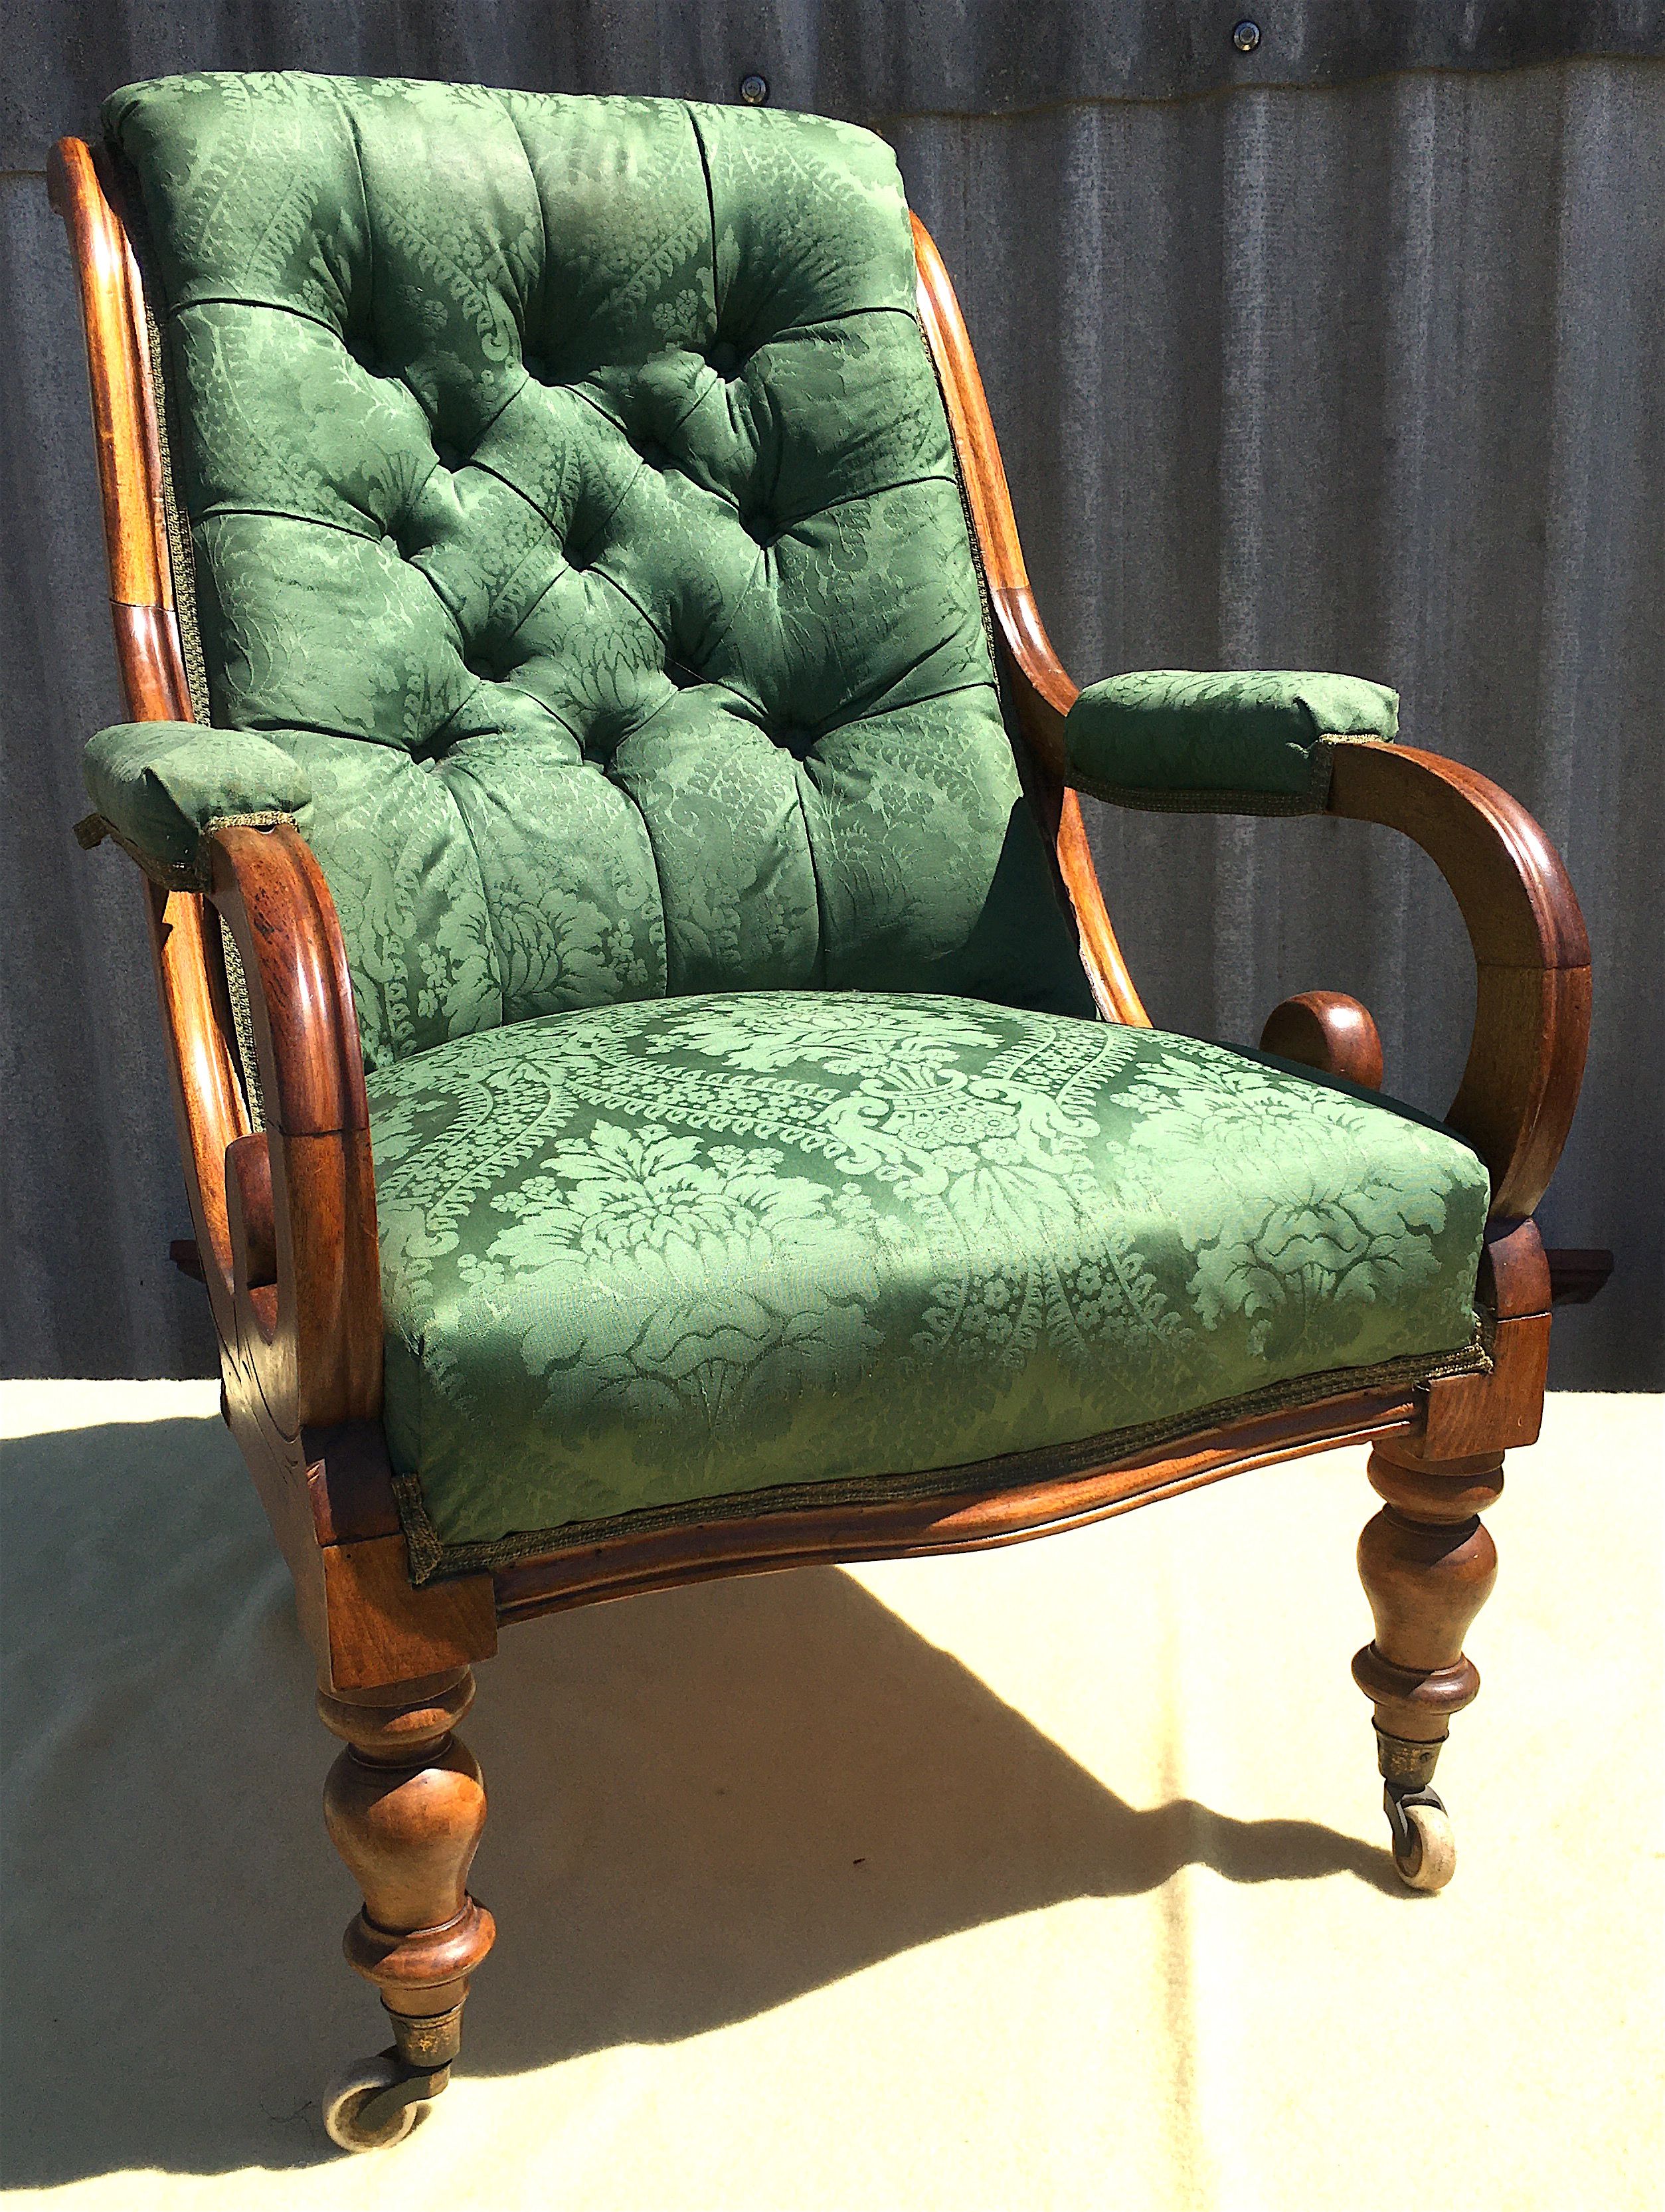 A mid Victorian upholstered mahogany armchair, width 66cm, depth 70cm, height 94cm